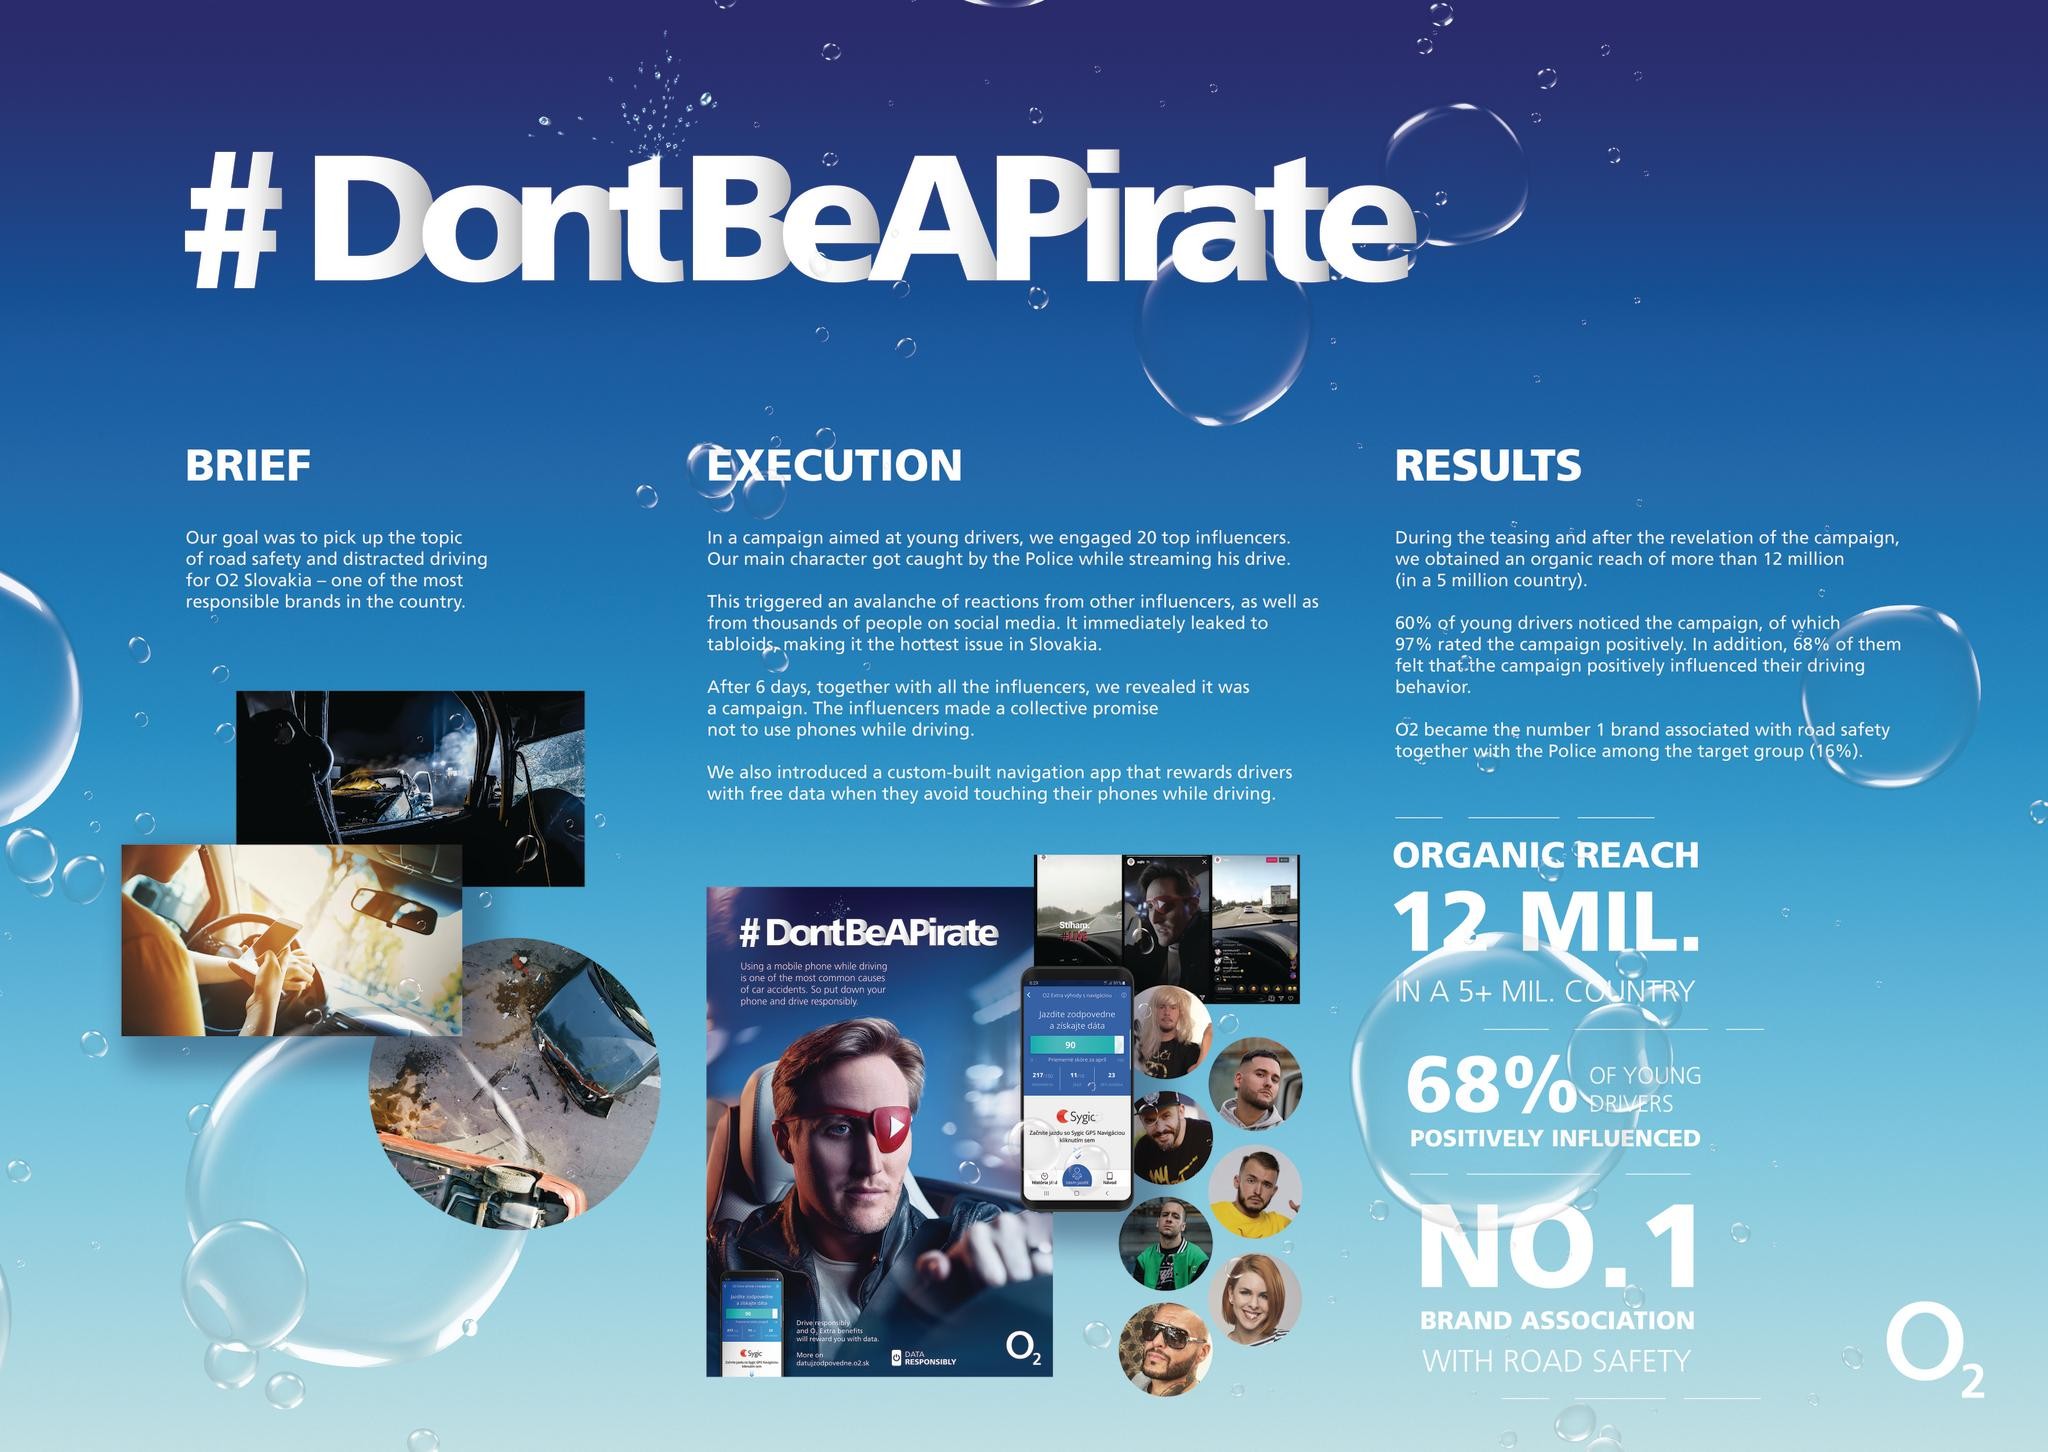 #DontBeAPirate